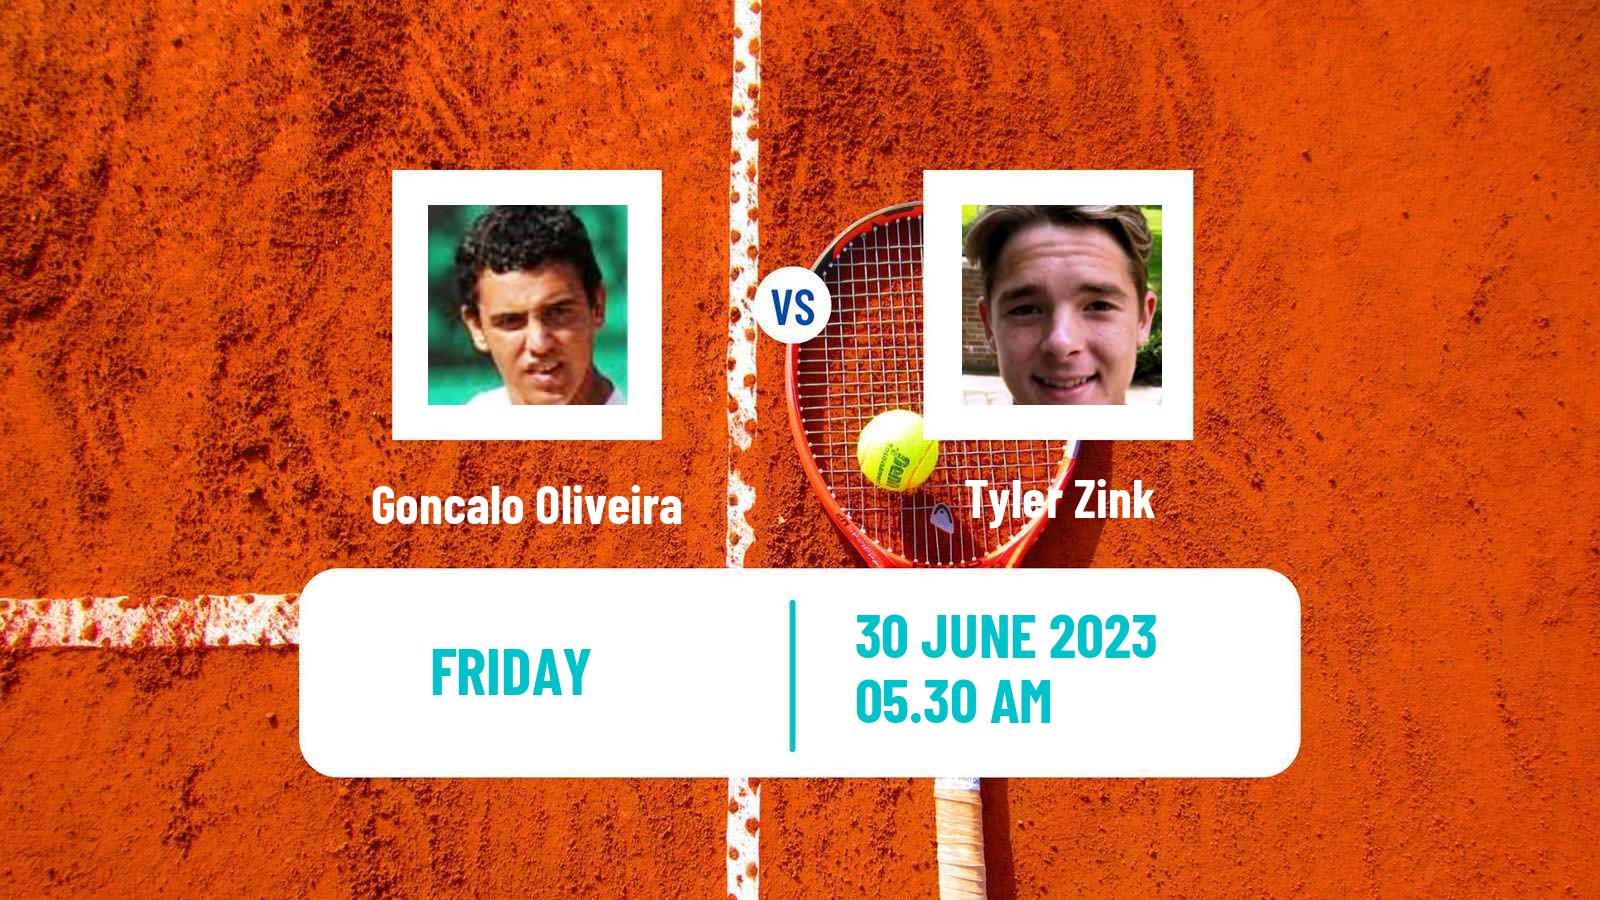 Tennis ITF M15 Wroclaw Men Goncalo Oliveira - Tyler Zink